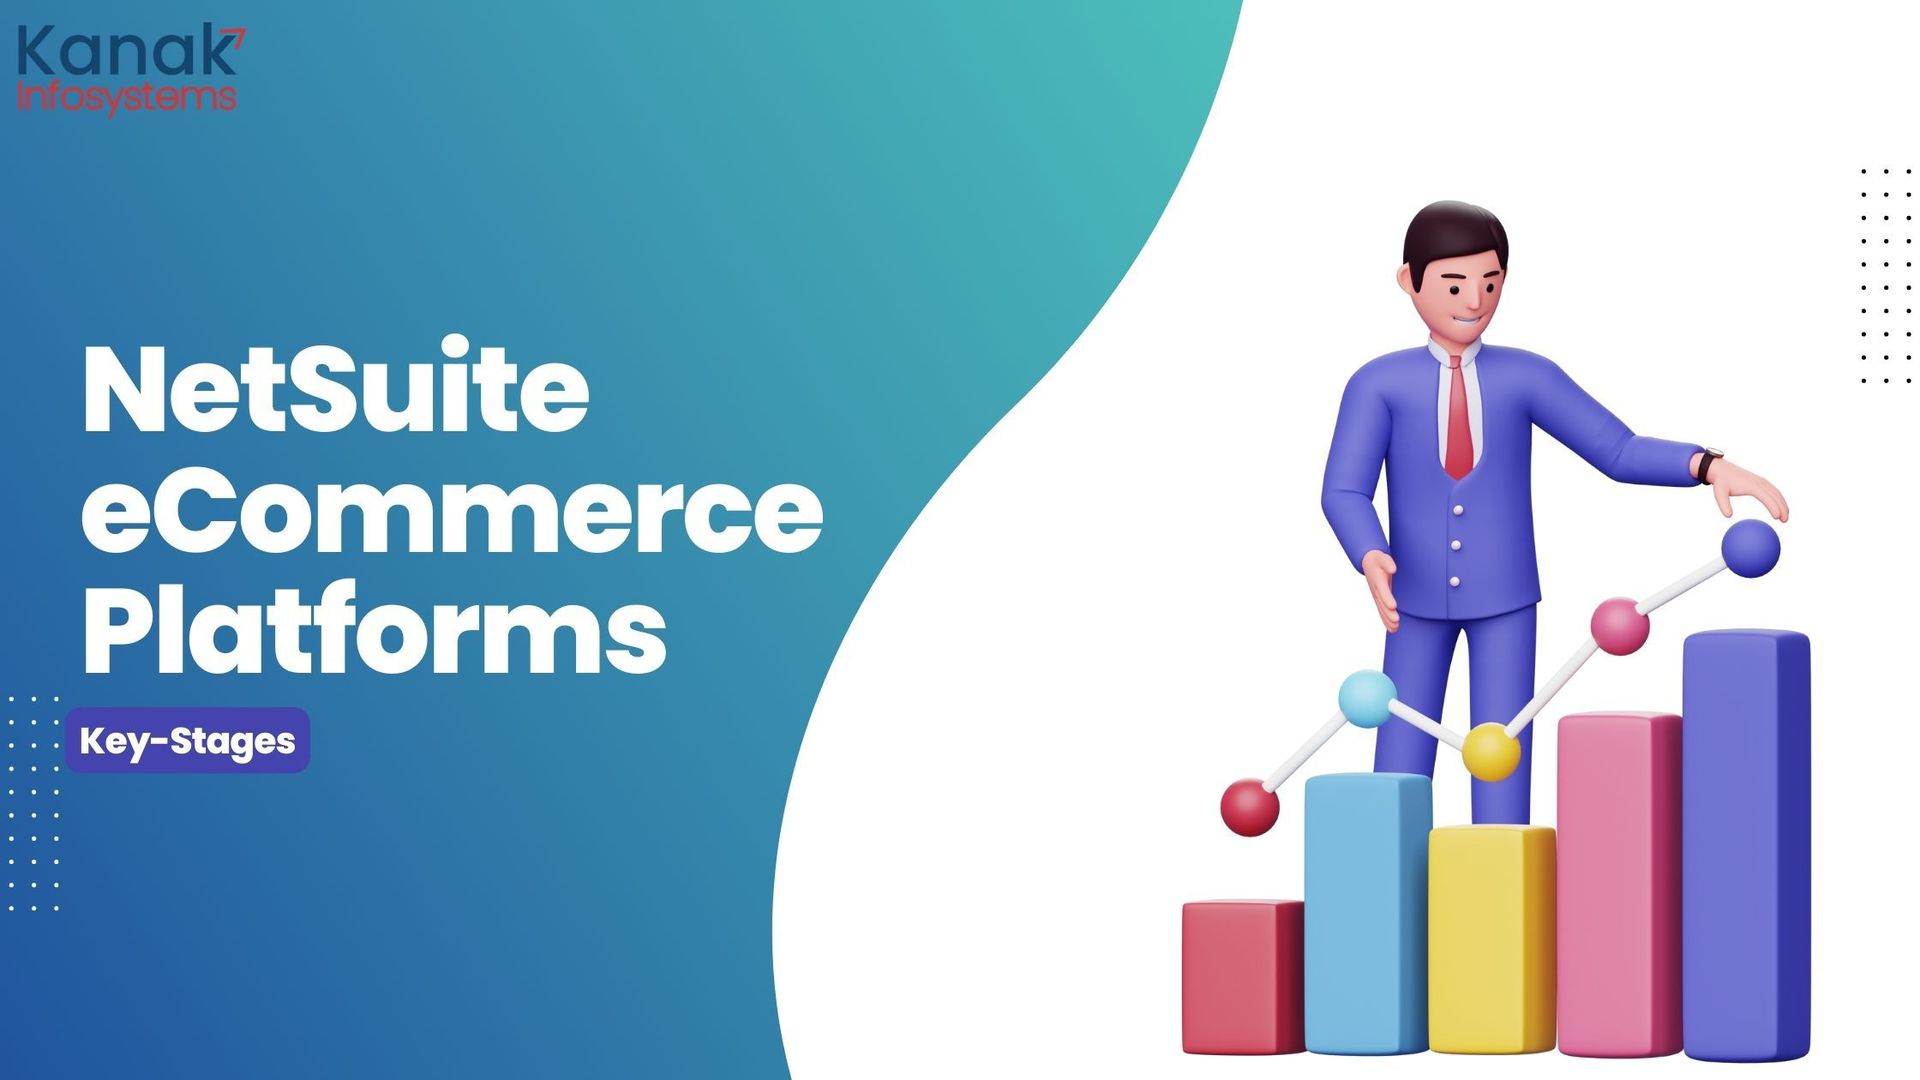 NetSuite eCommerce Platforms: Key Stages